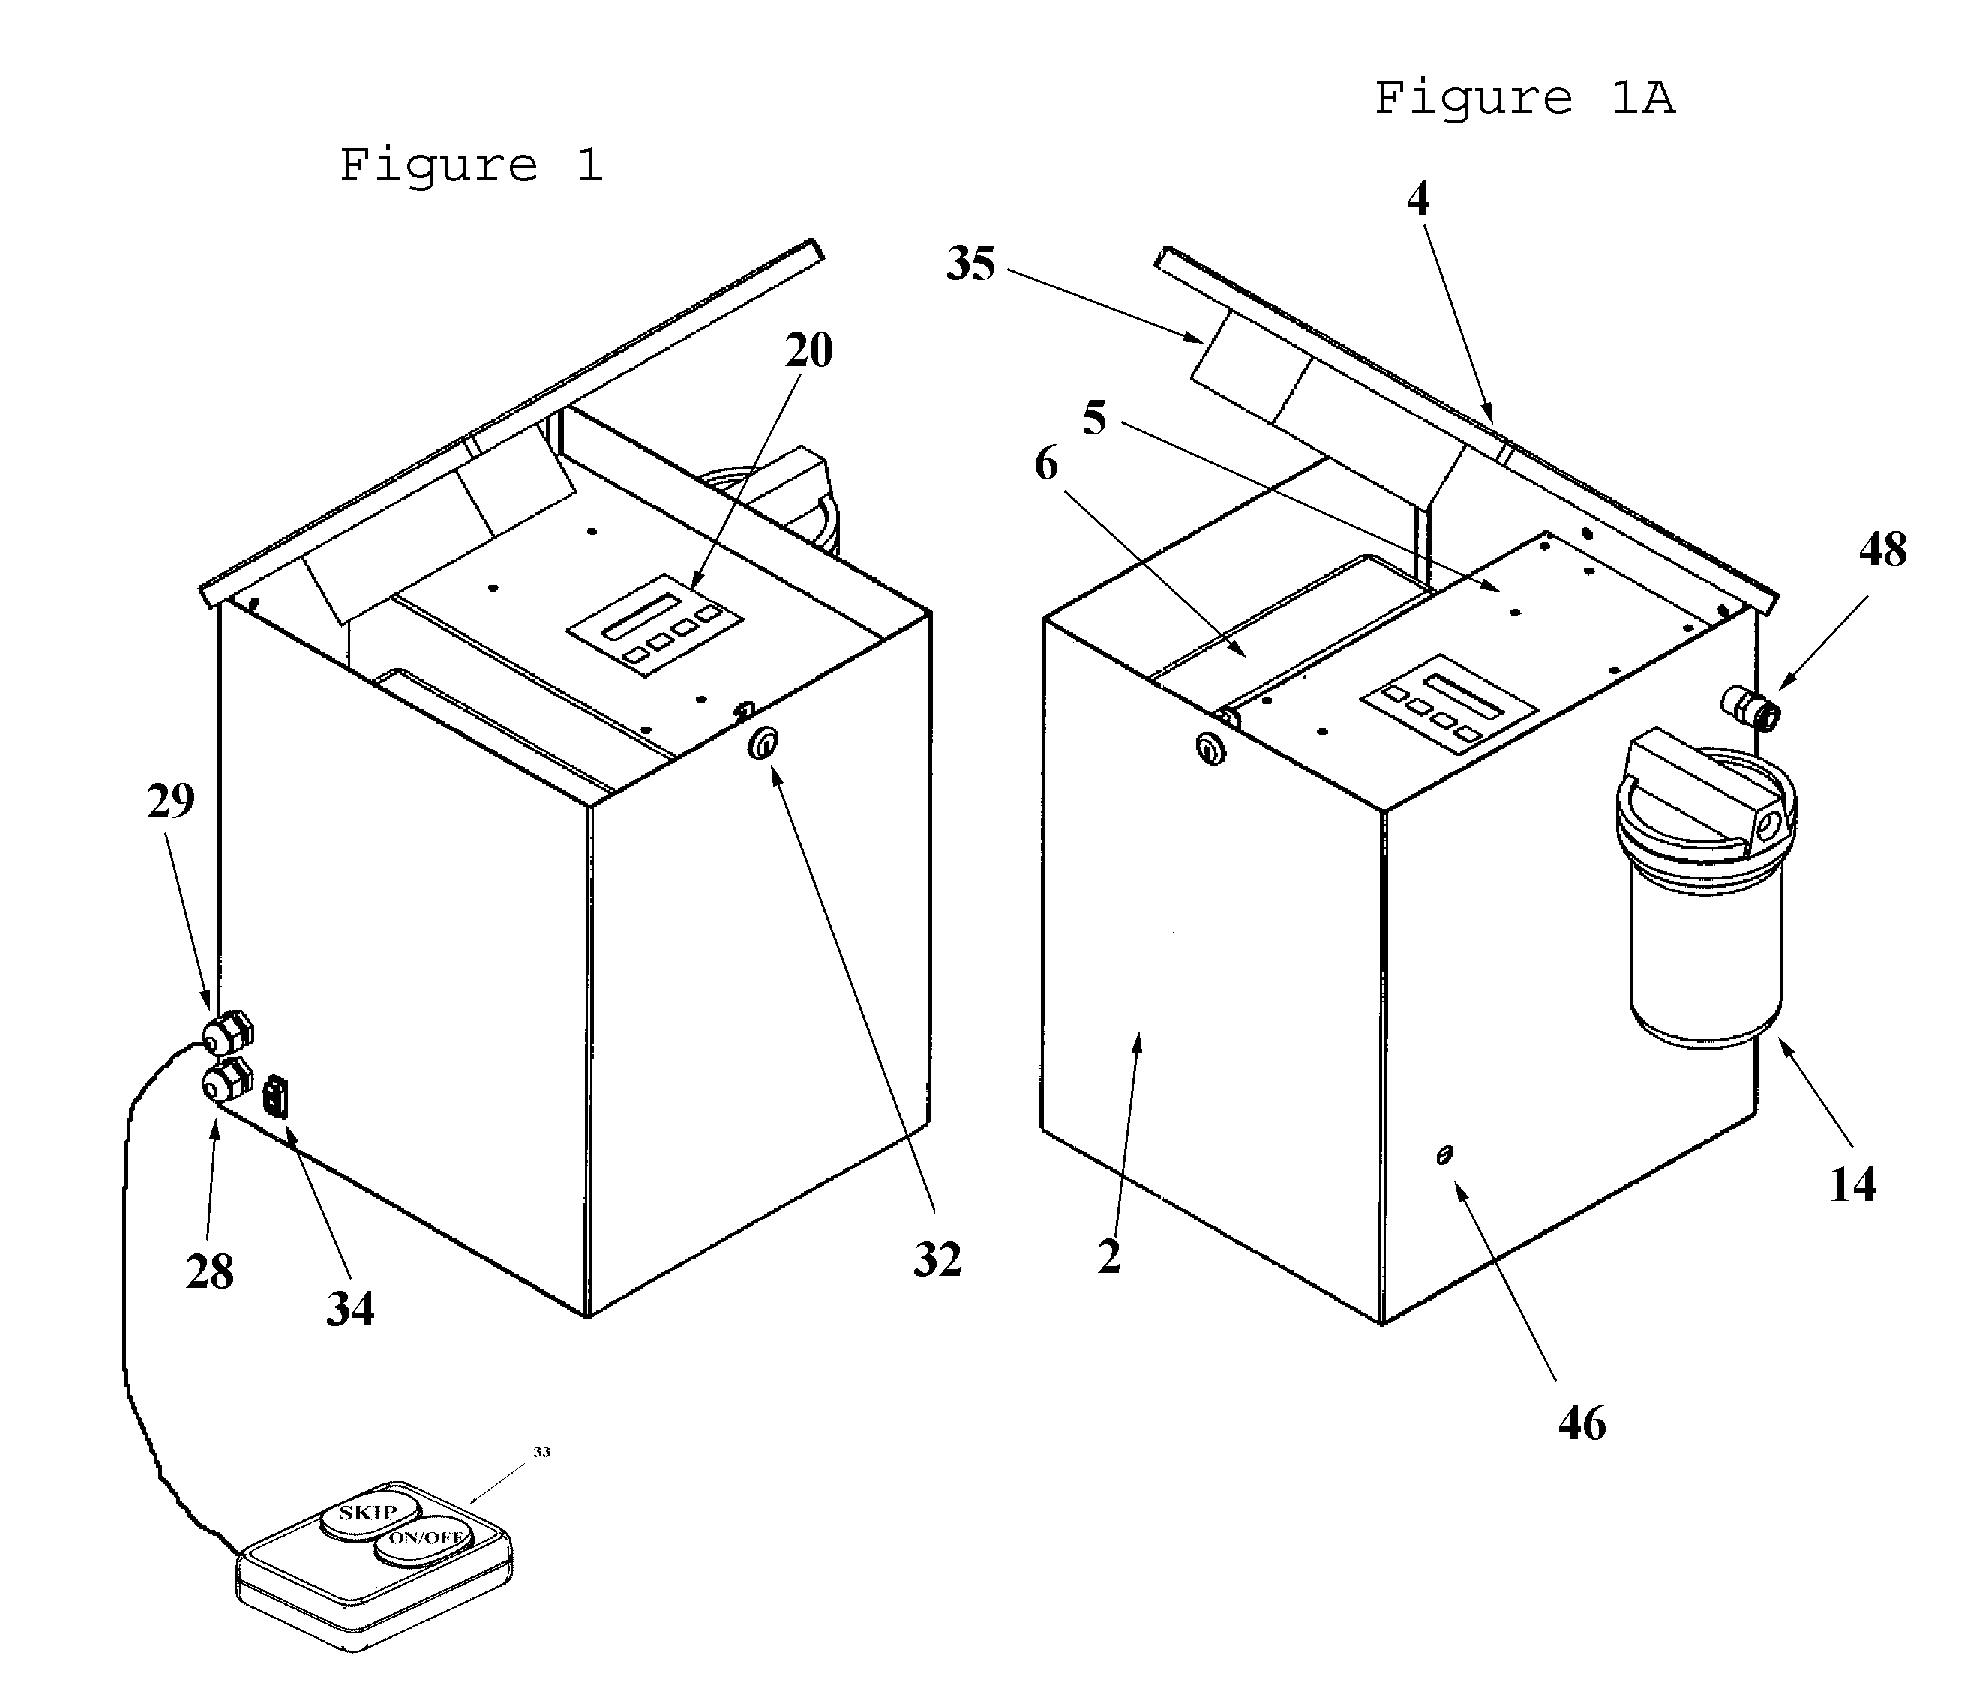 Self-contained insect repelling and killing apparatus